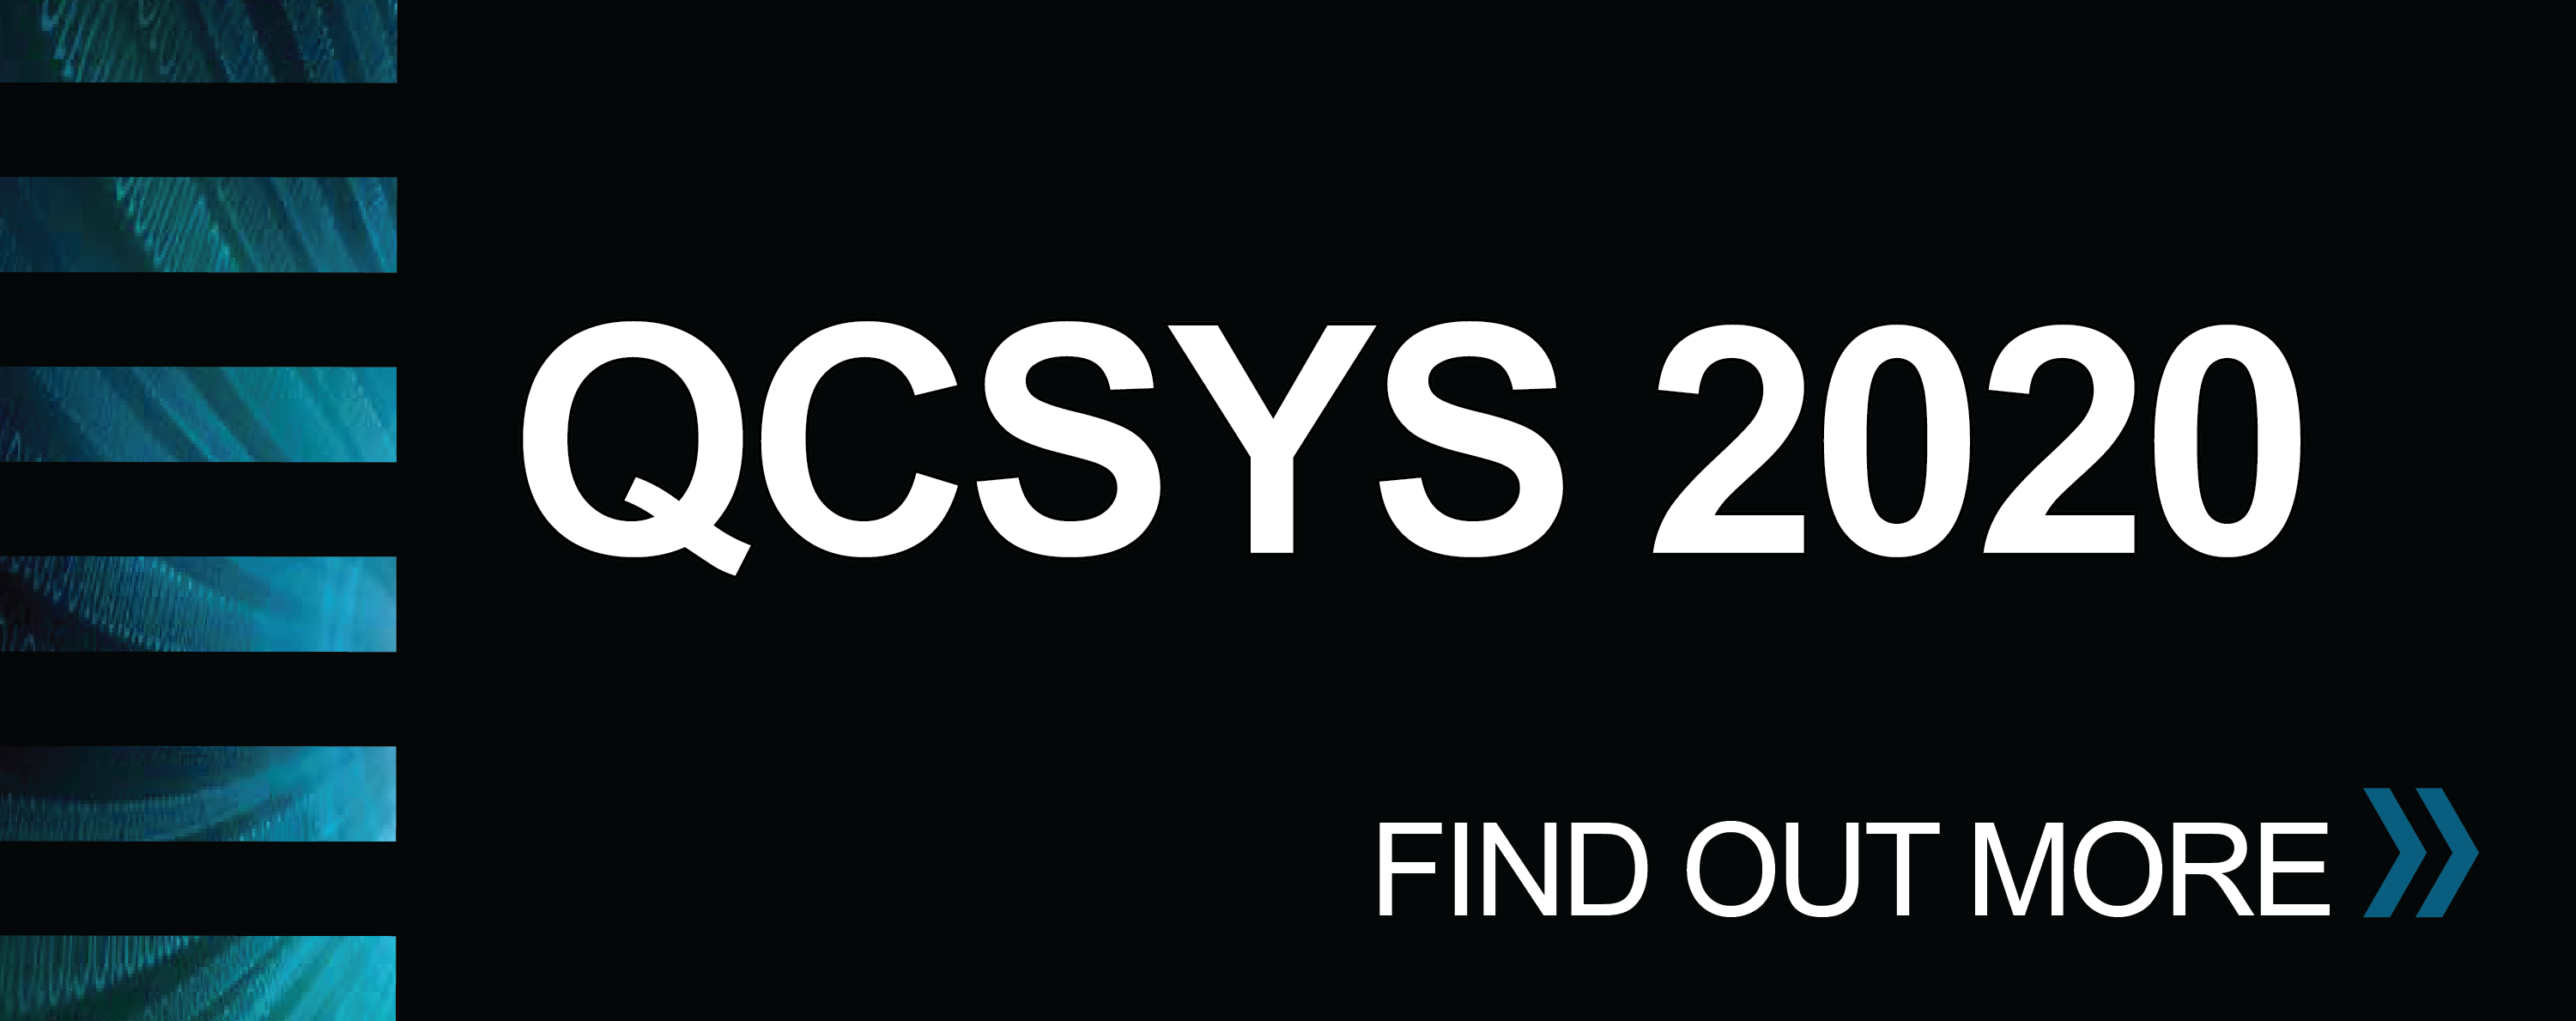 Find out more about QCSYS 2020